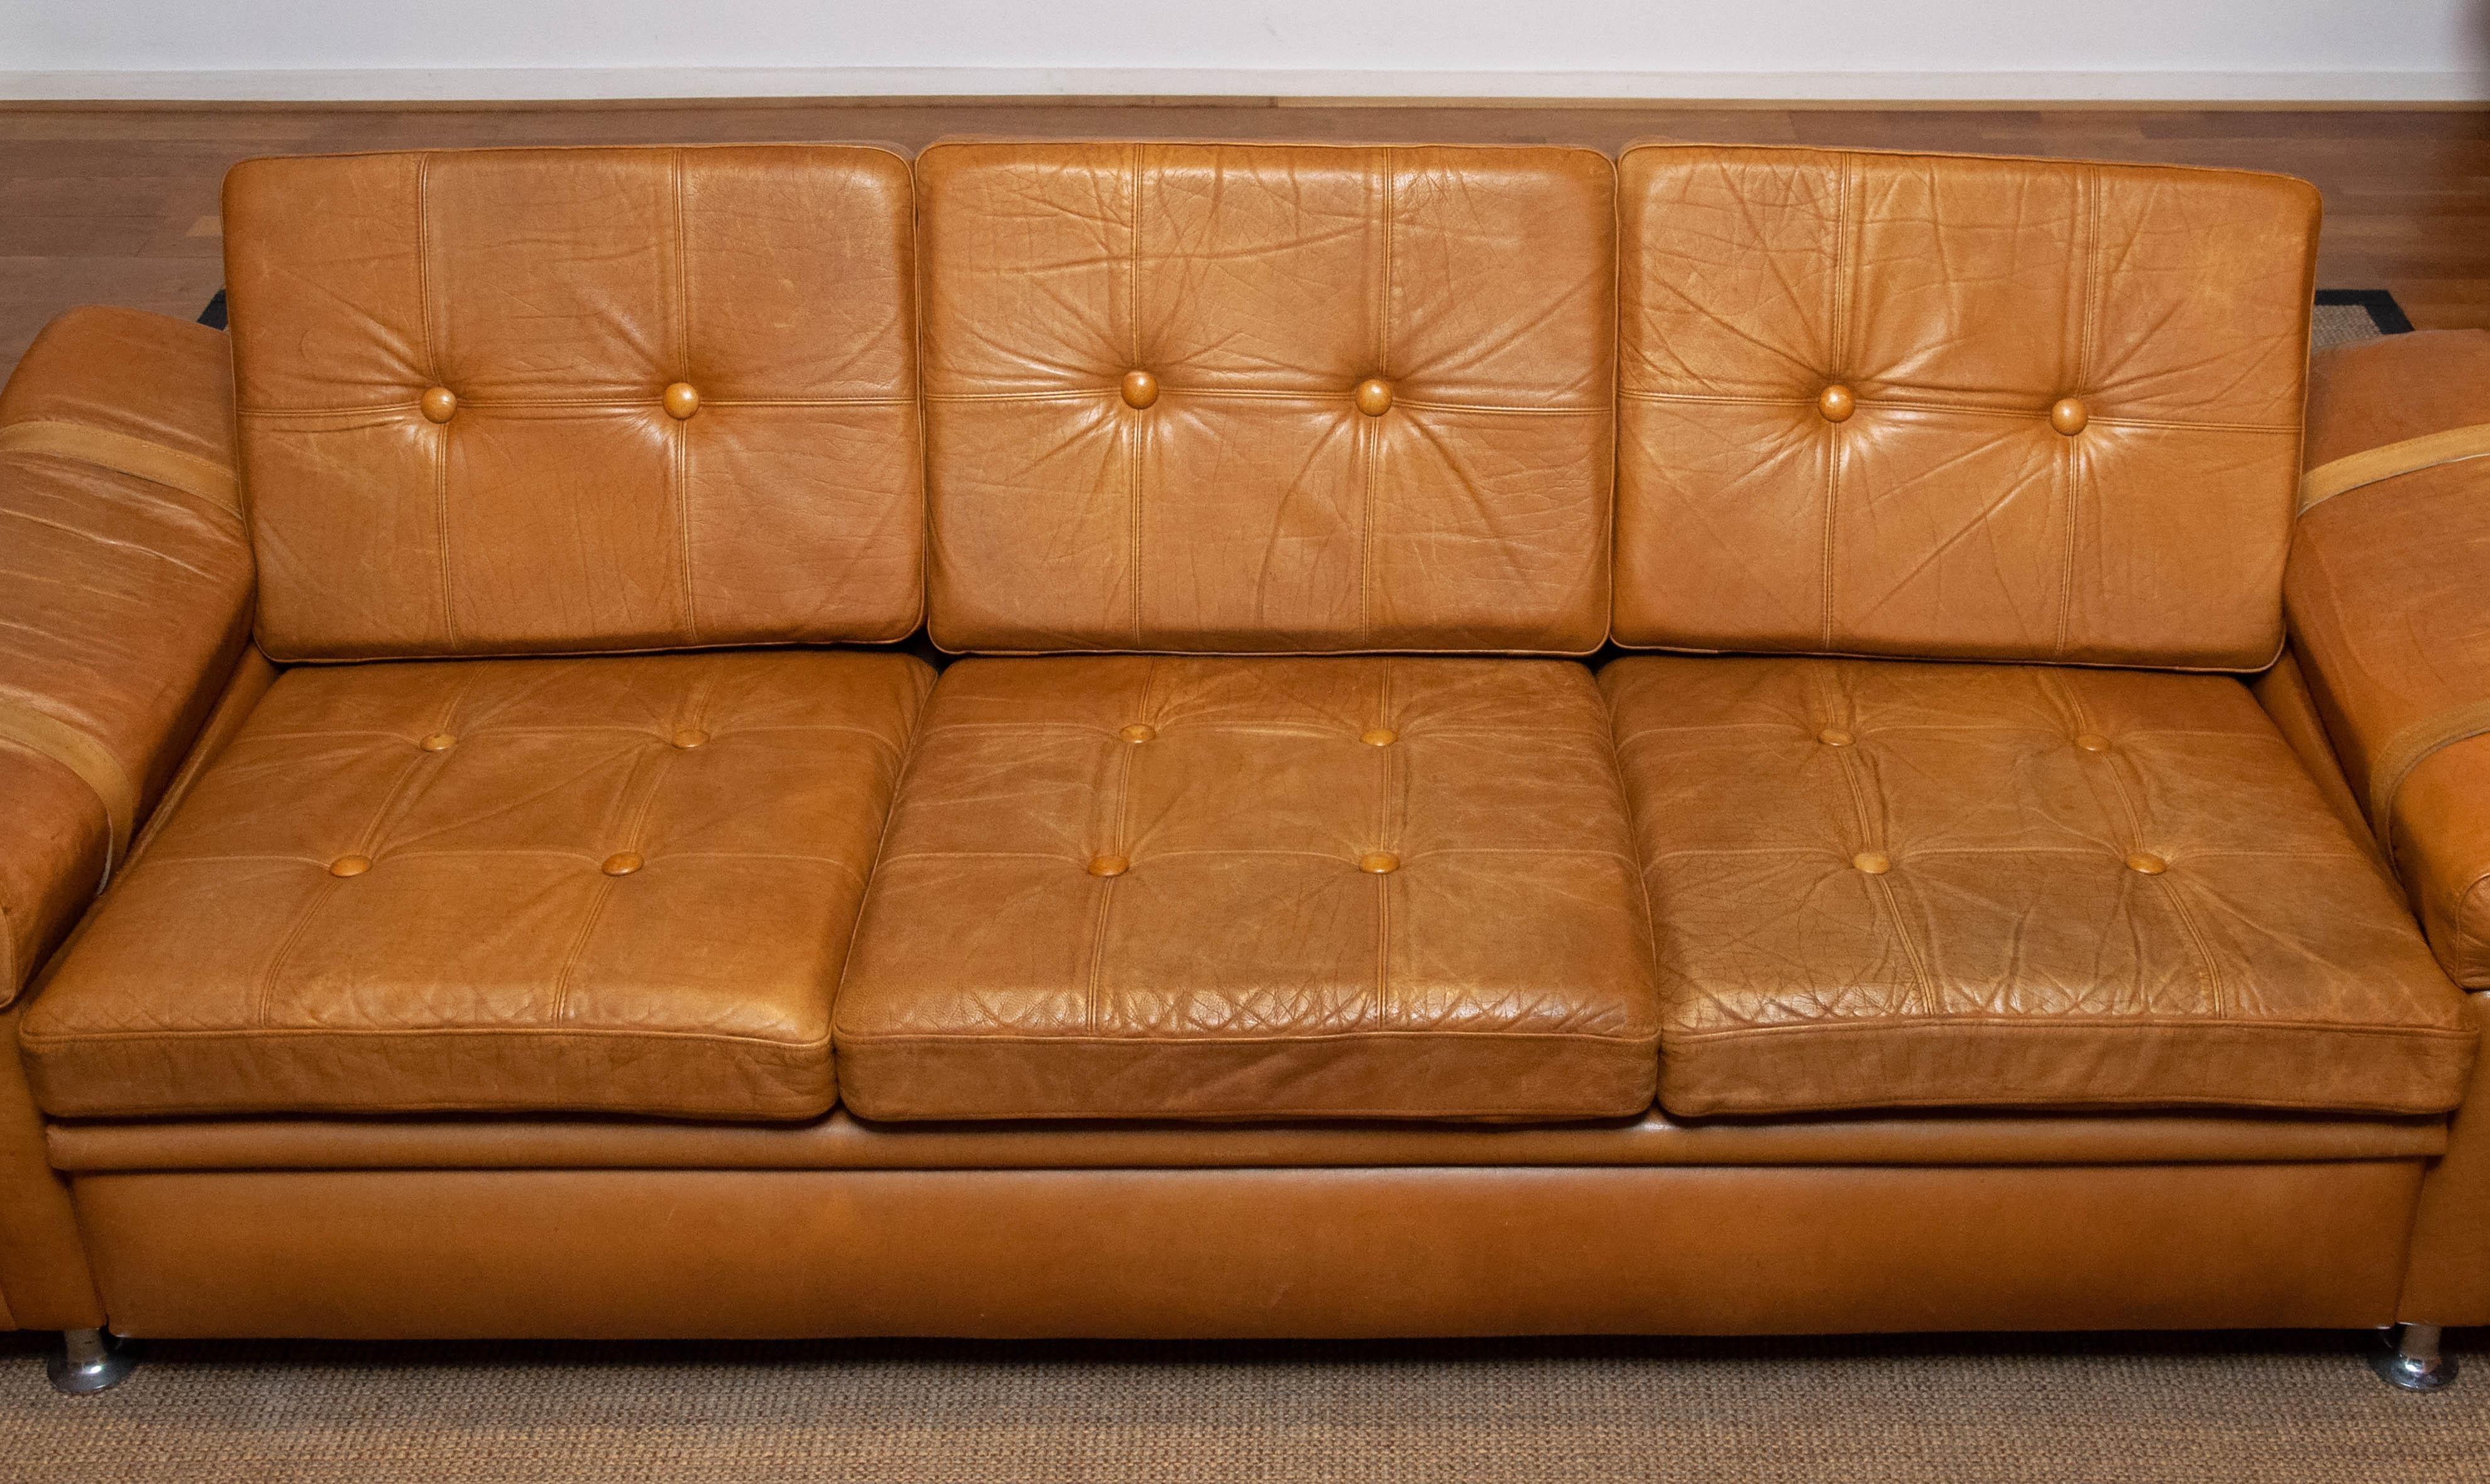 1970s Scandinavian Brutalist Three-Seater Low-Back Sofa in Camel Colored Leather For Sale 6